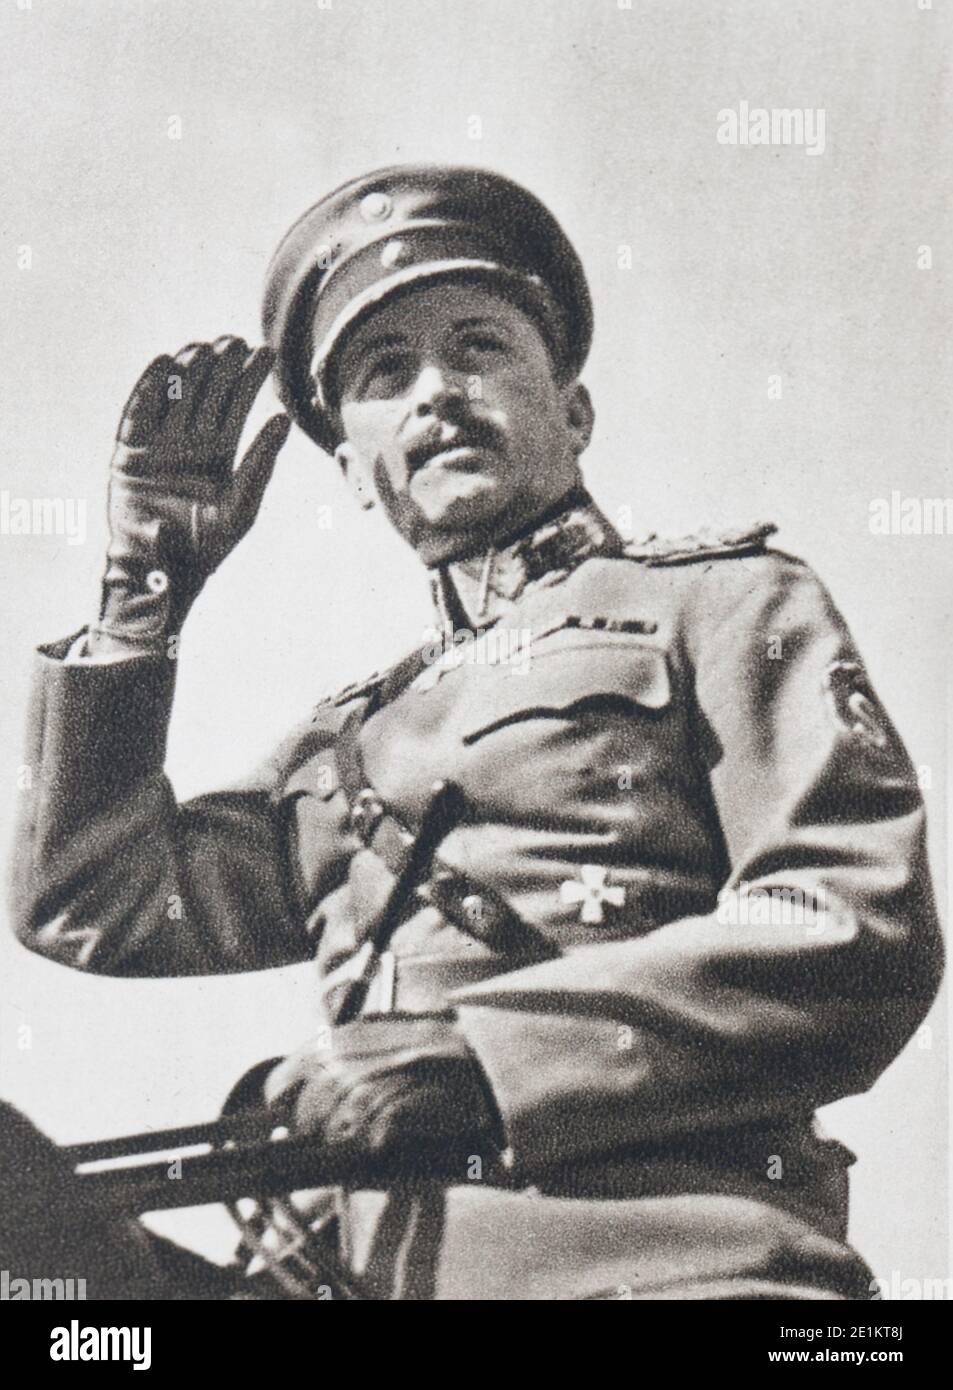 Baron Carl Gustaf Emil Mannerheim (1867 – 1951) was a Finnish military leader and statesman. Military leader of the Whites in the Finnish Civil War, R Stock Photo